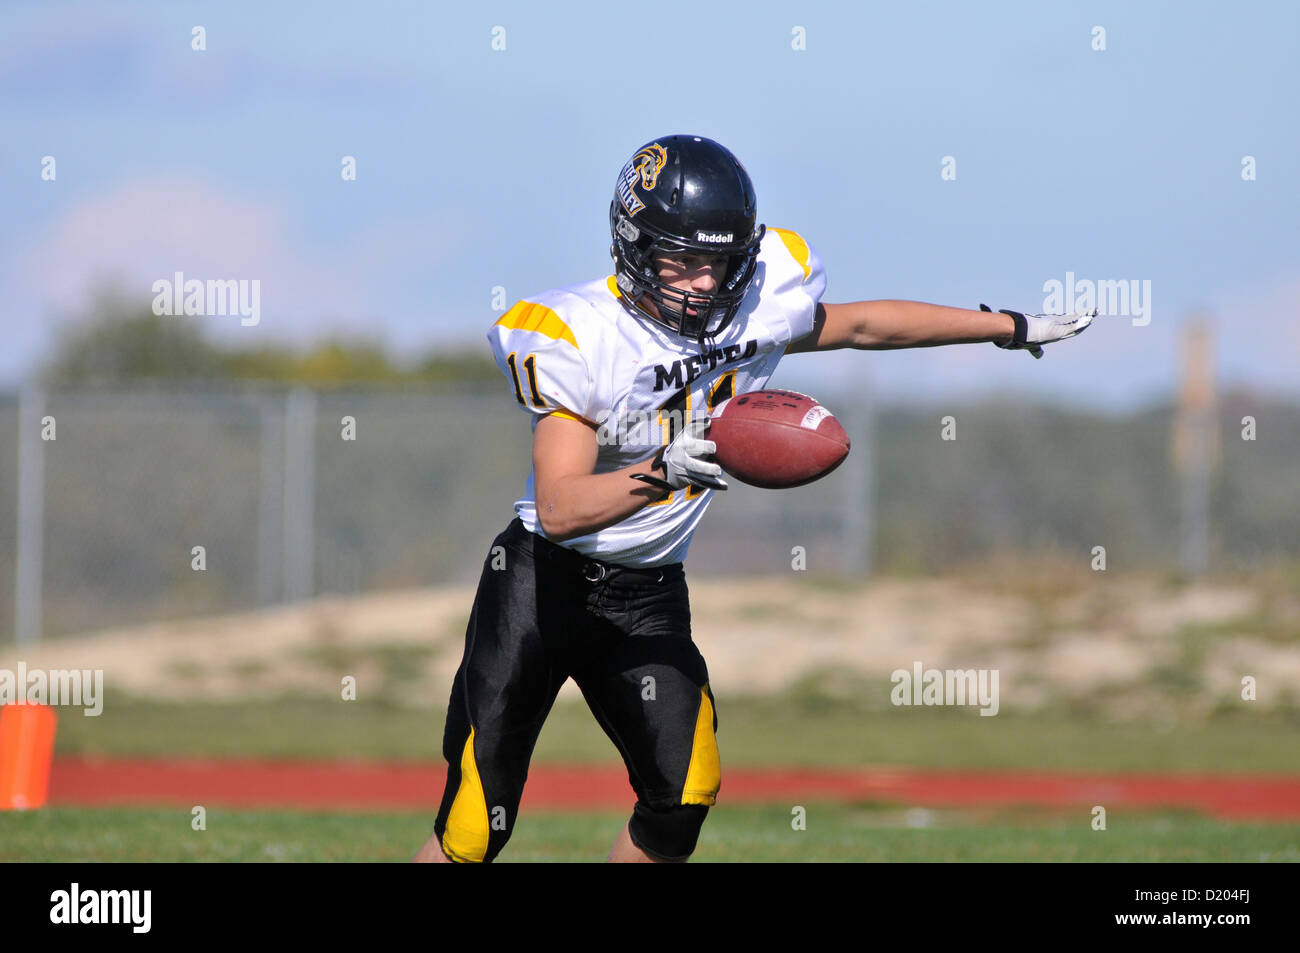 Football Punter releases the ball as he begins his stride to get off his kick during a high school game. USA. Stock Photo